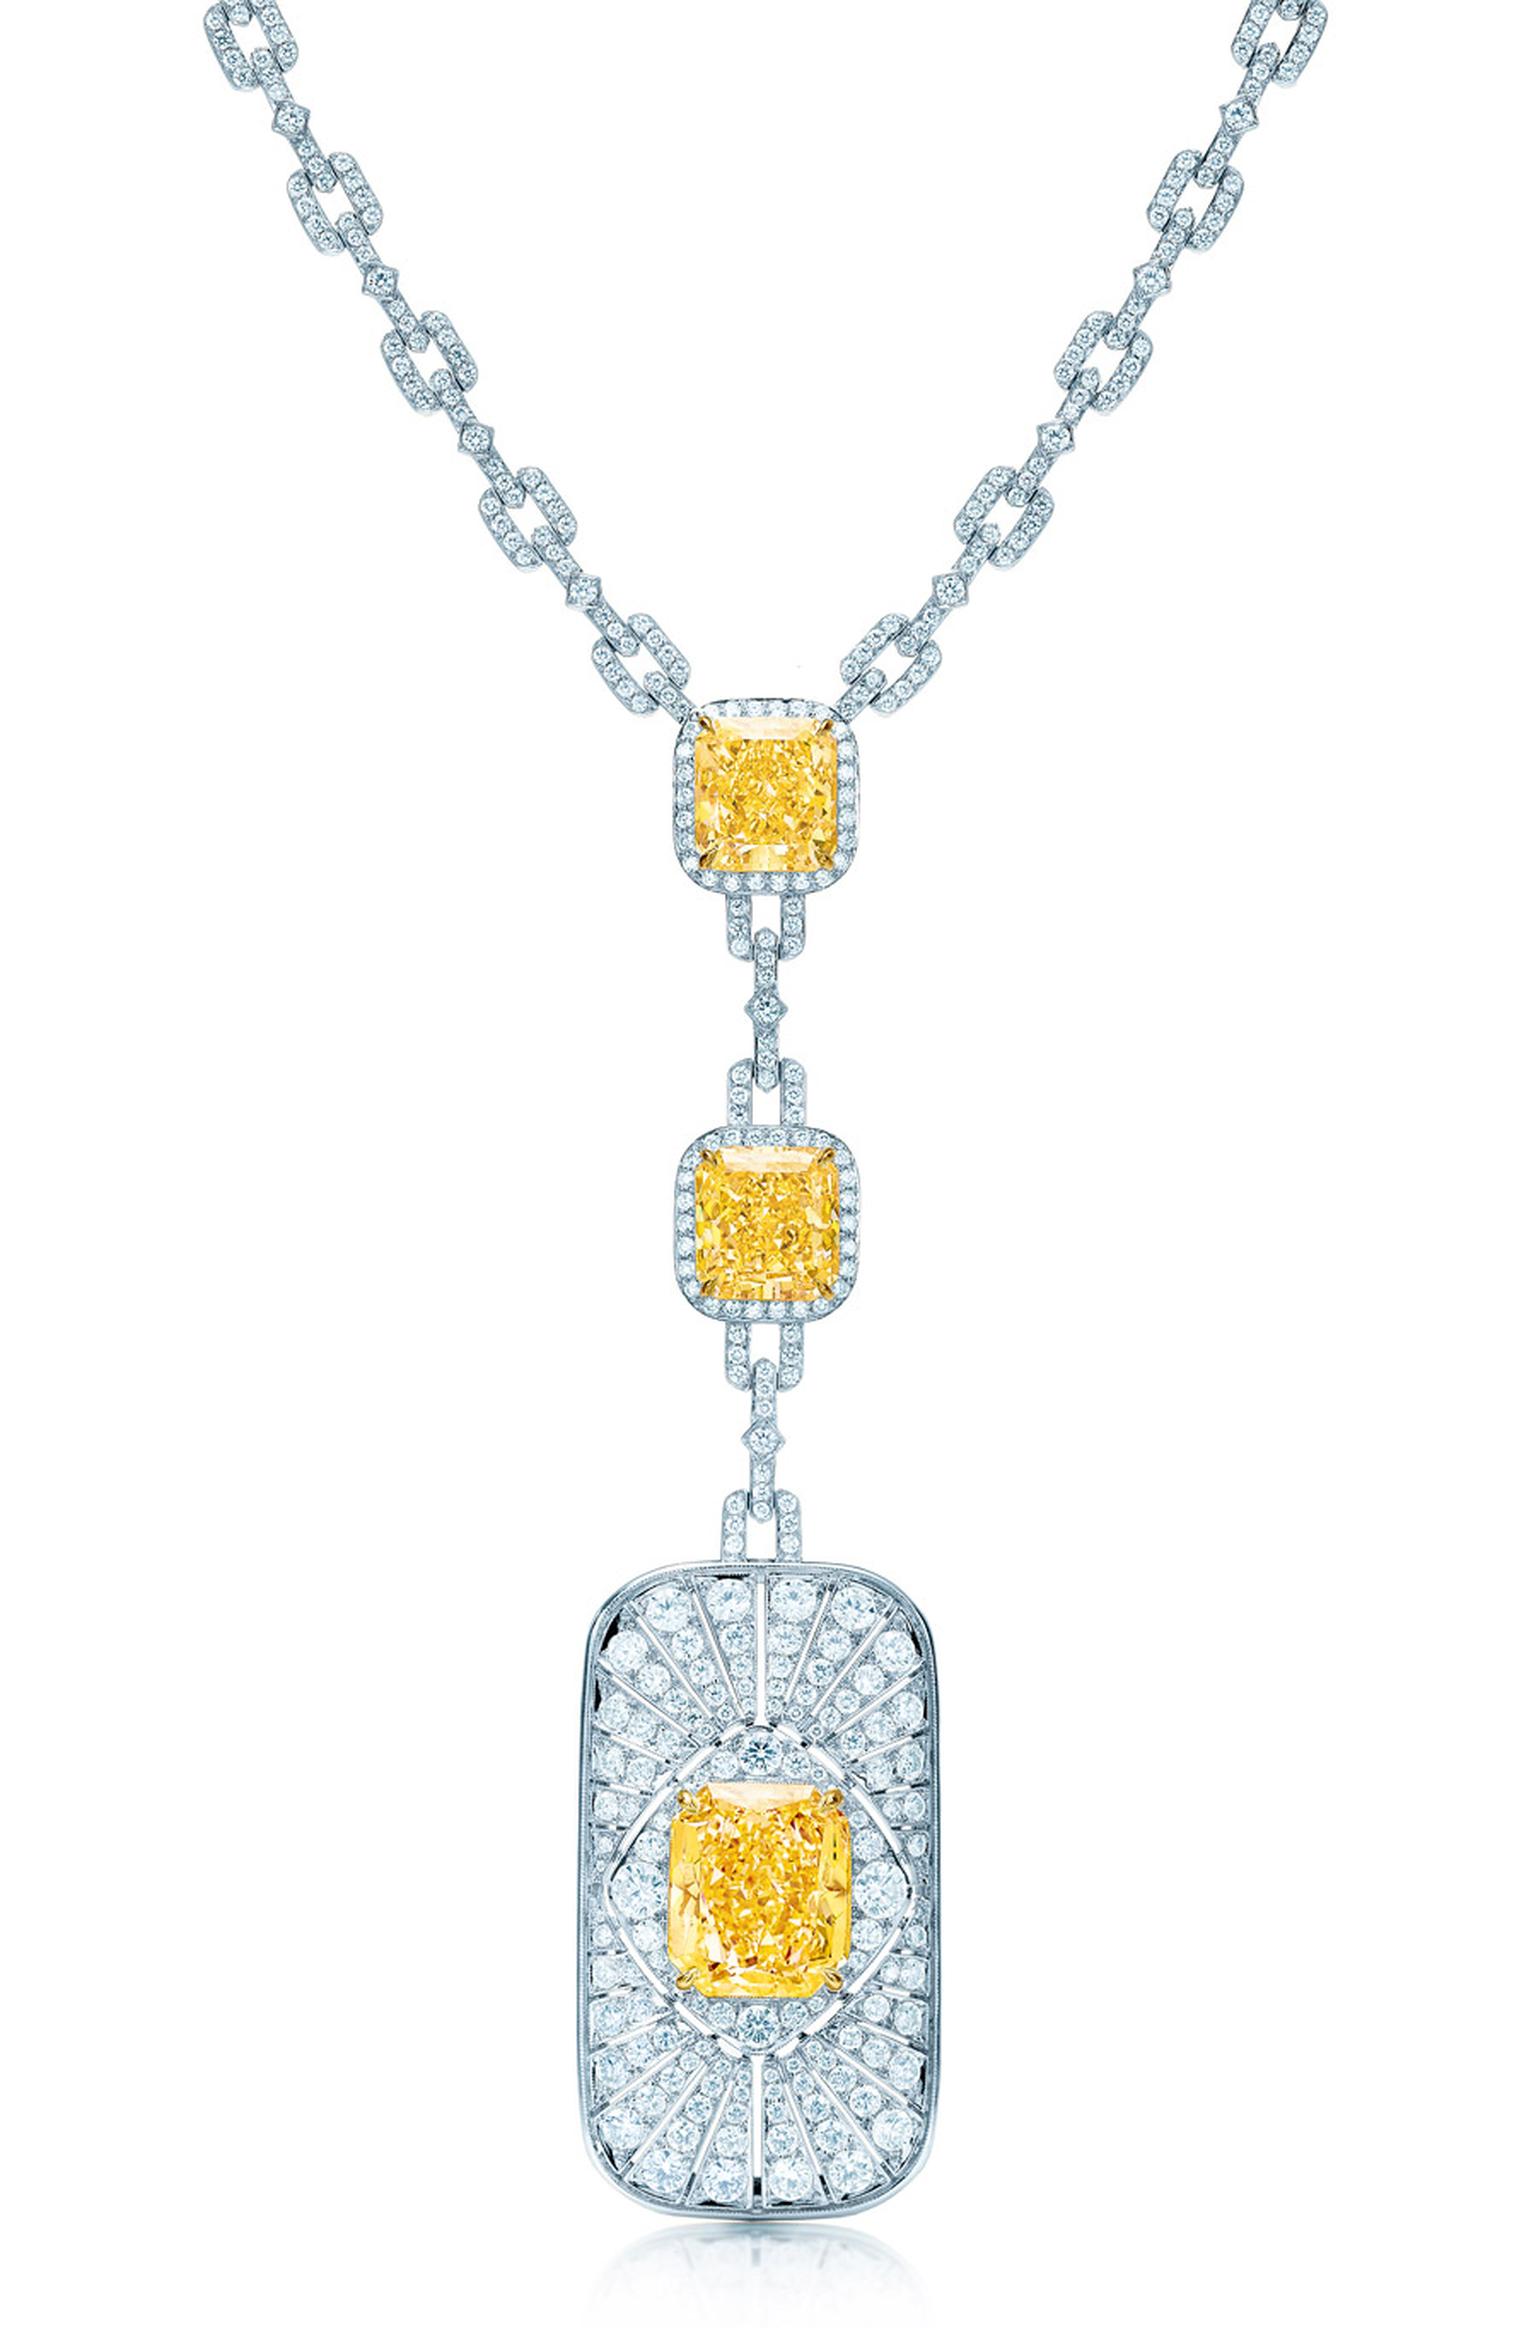 Masterpiece-Art-Deco-inspired-necklace-in-platinum-based-on-jewels-in-the-Tiffany-archives.jpg